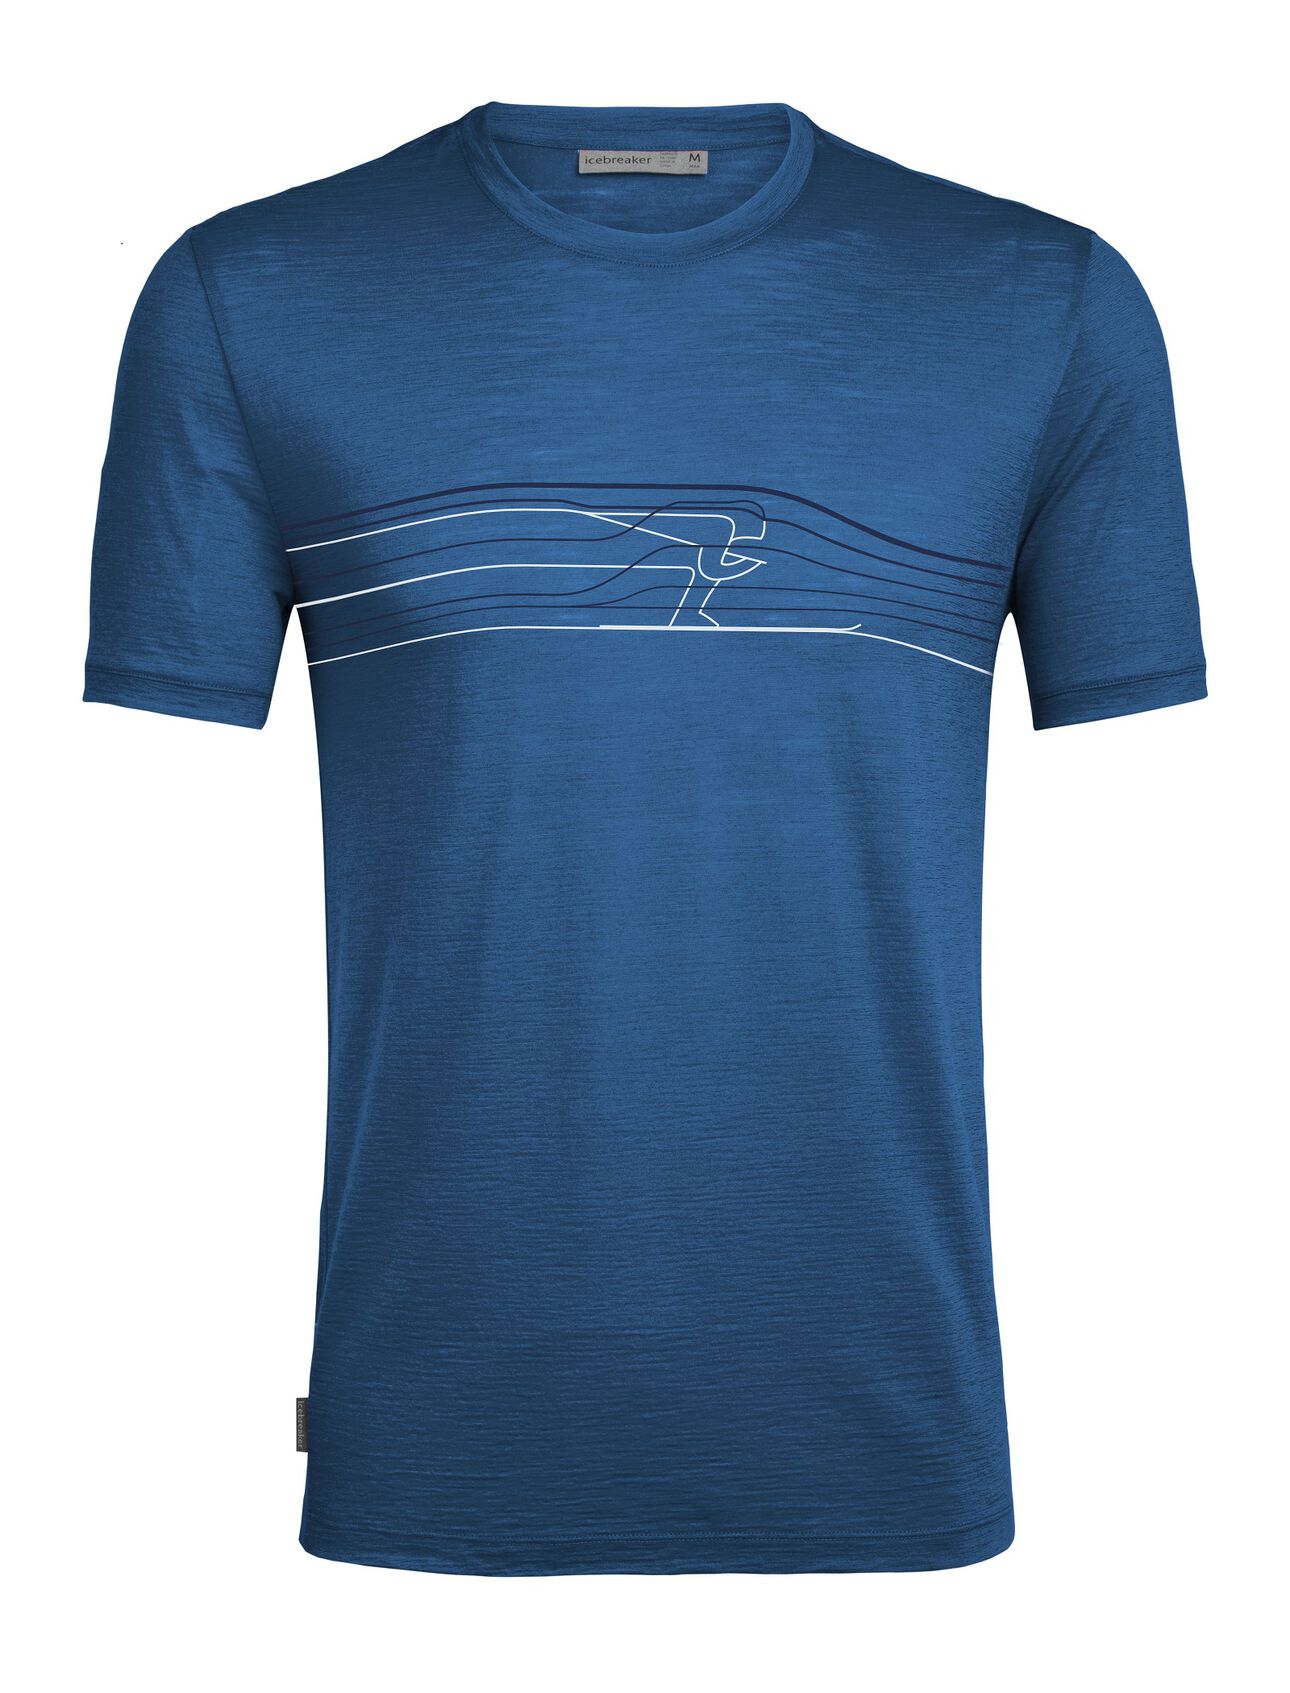 para hombre Merino Spector Short Sleeve Crewe T-Shirt Ski Racer A lightweight, breathable, and versatile merino wool T-shirt ideal for everything from hiking to travel, our Spector Short Sleeve Crewe Ski Racer is a go-to for any and every day.